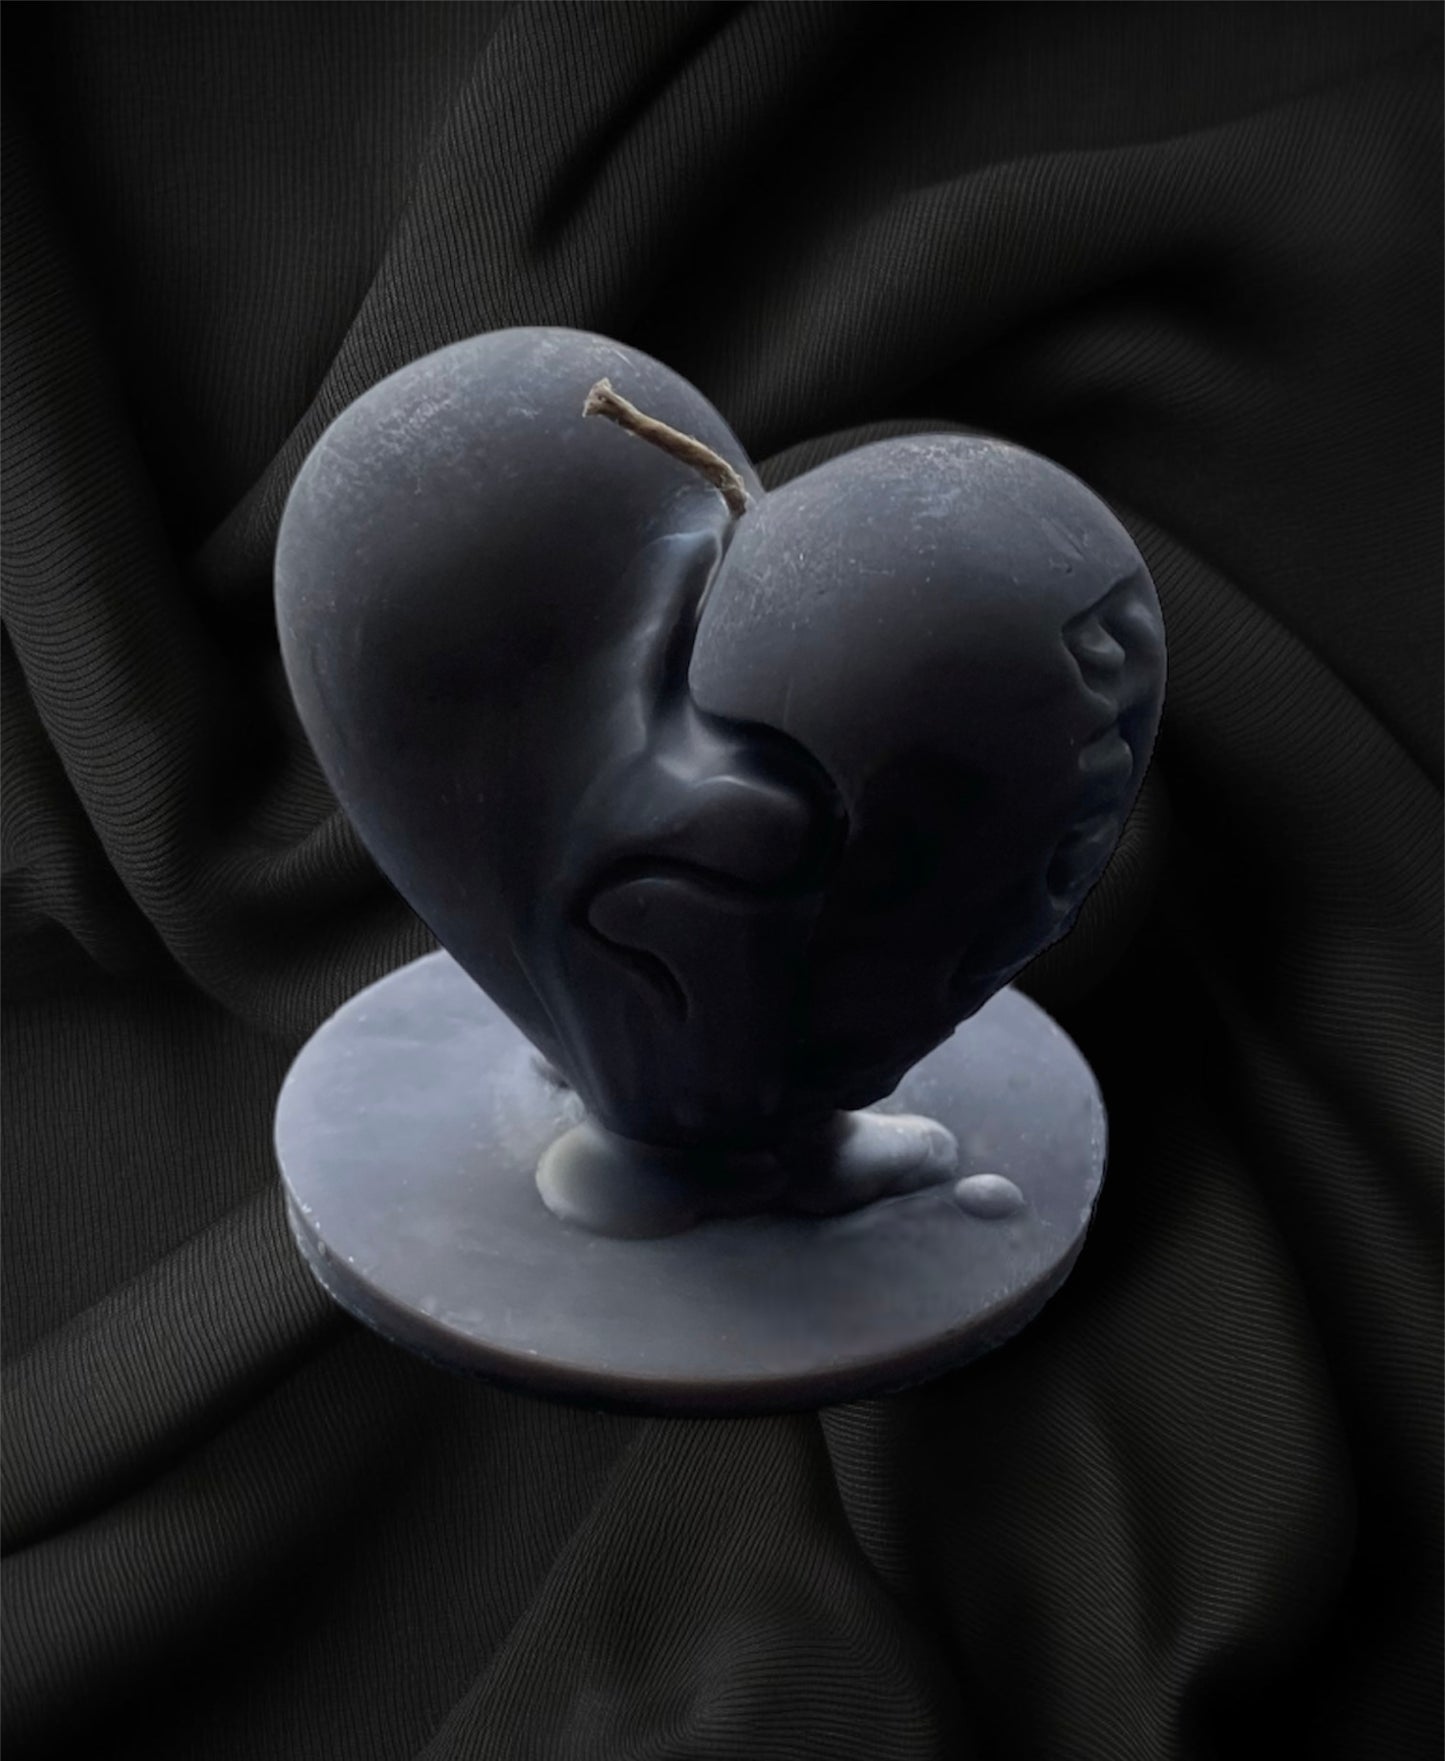 the melted heart candle